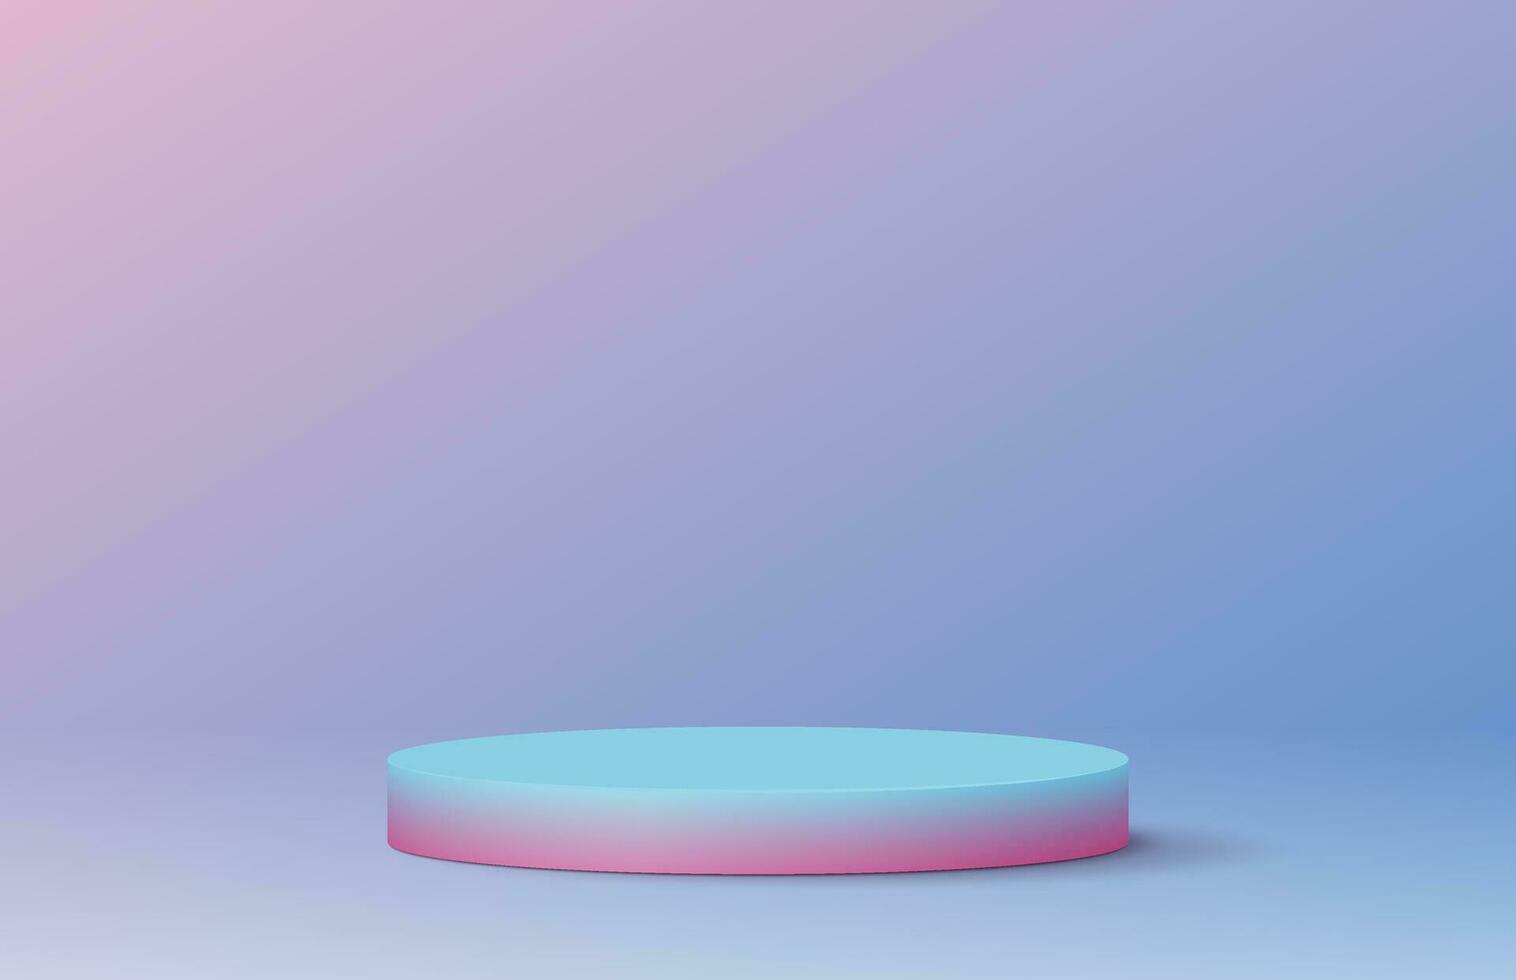 Blue and Pink Podium Candy Colored Realistic 3d Style. Vector illustration